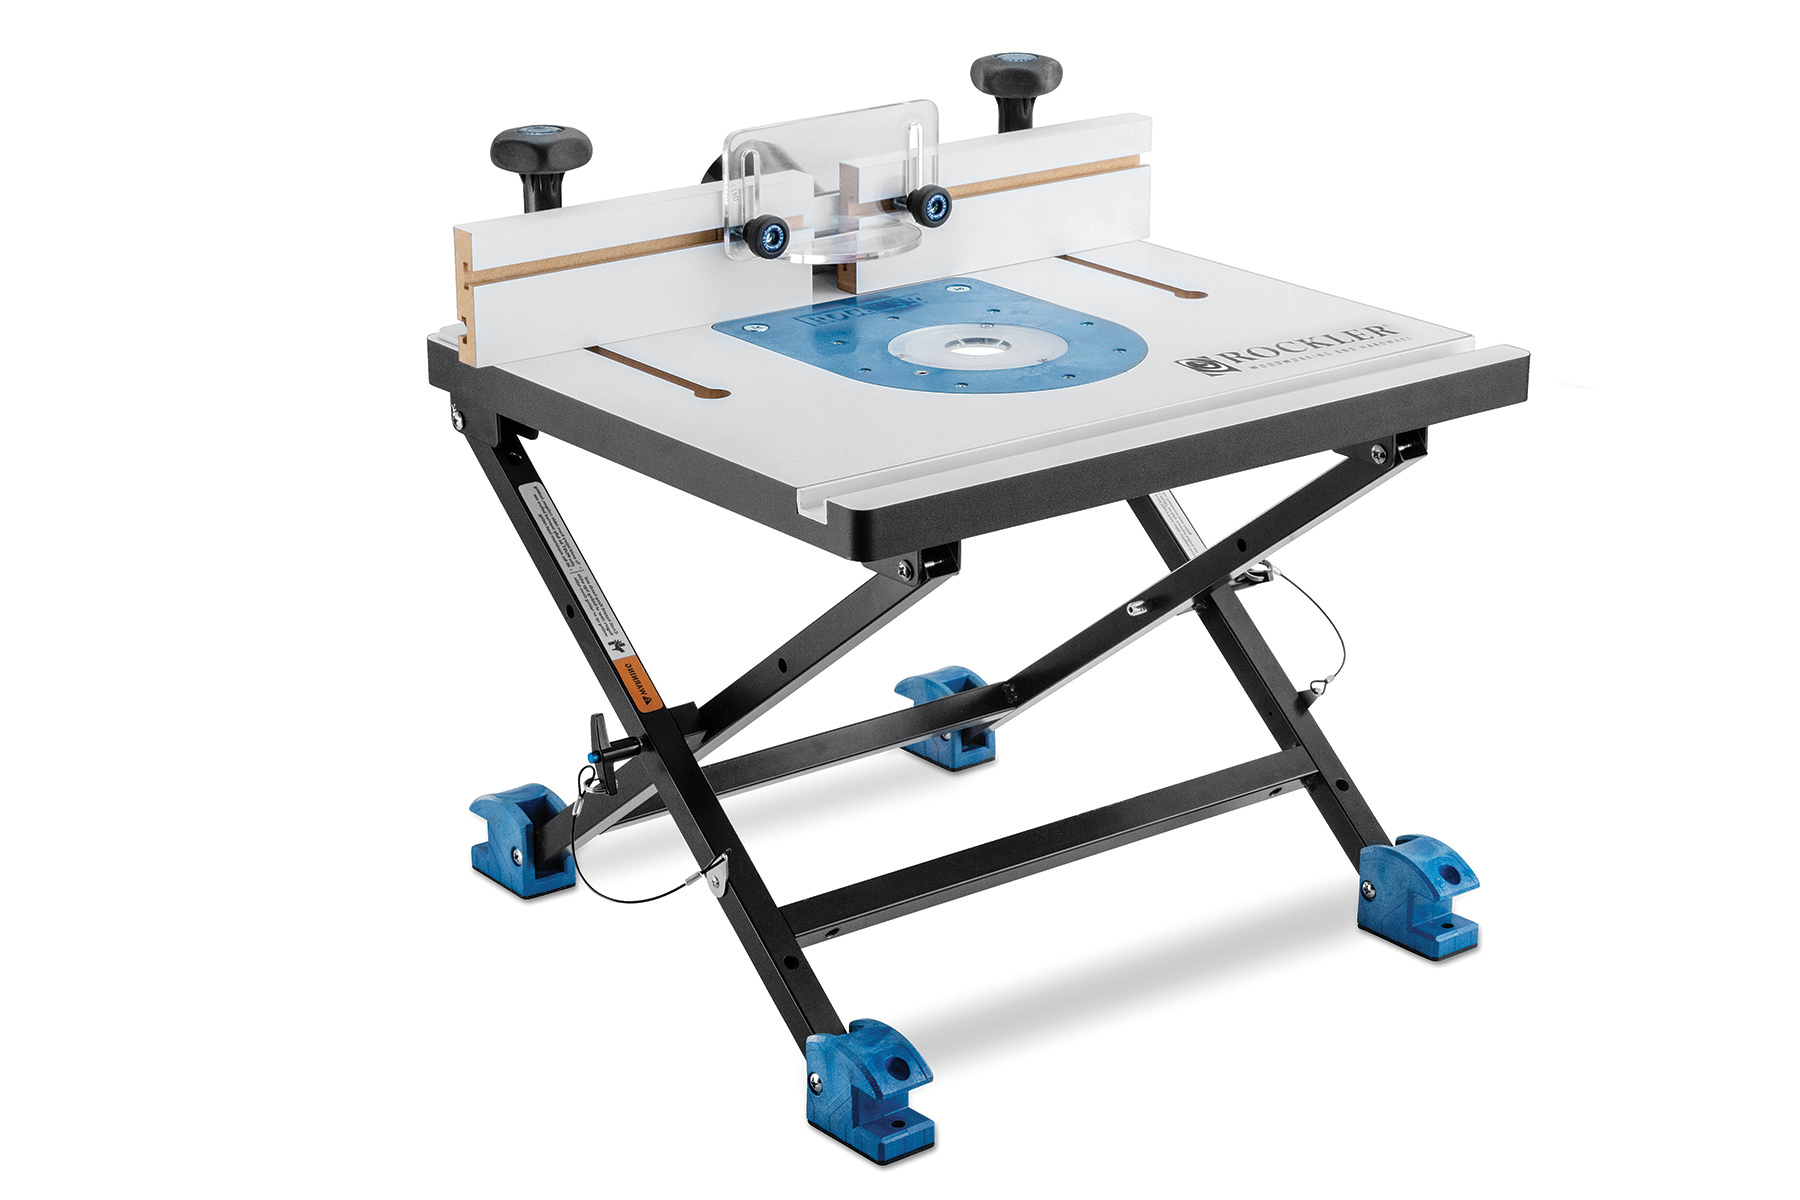 Another routing accessory, the Convertible Benchtop Router Table, won in the "Stands, Tables & Bases" category.